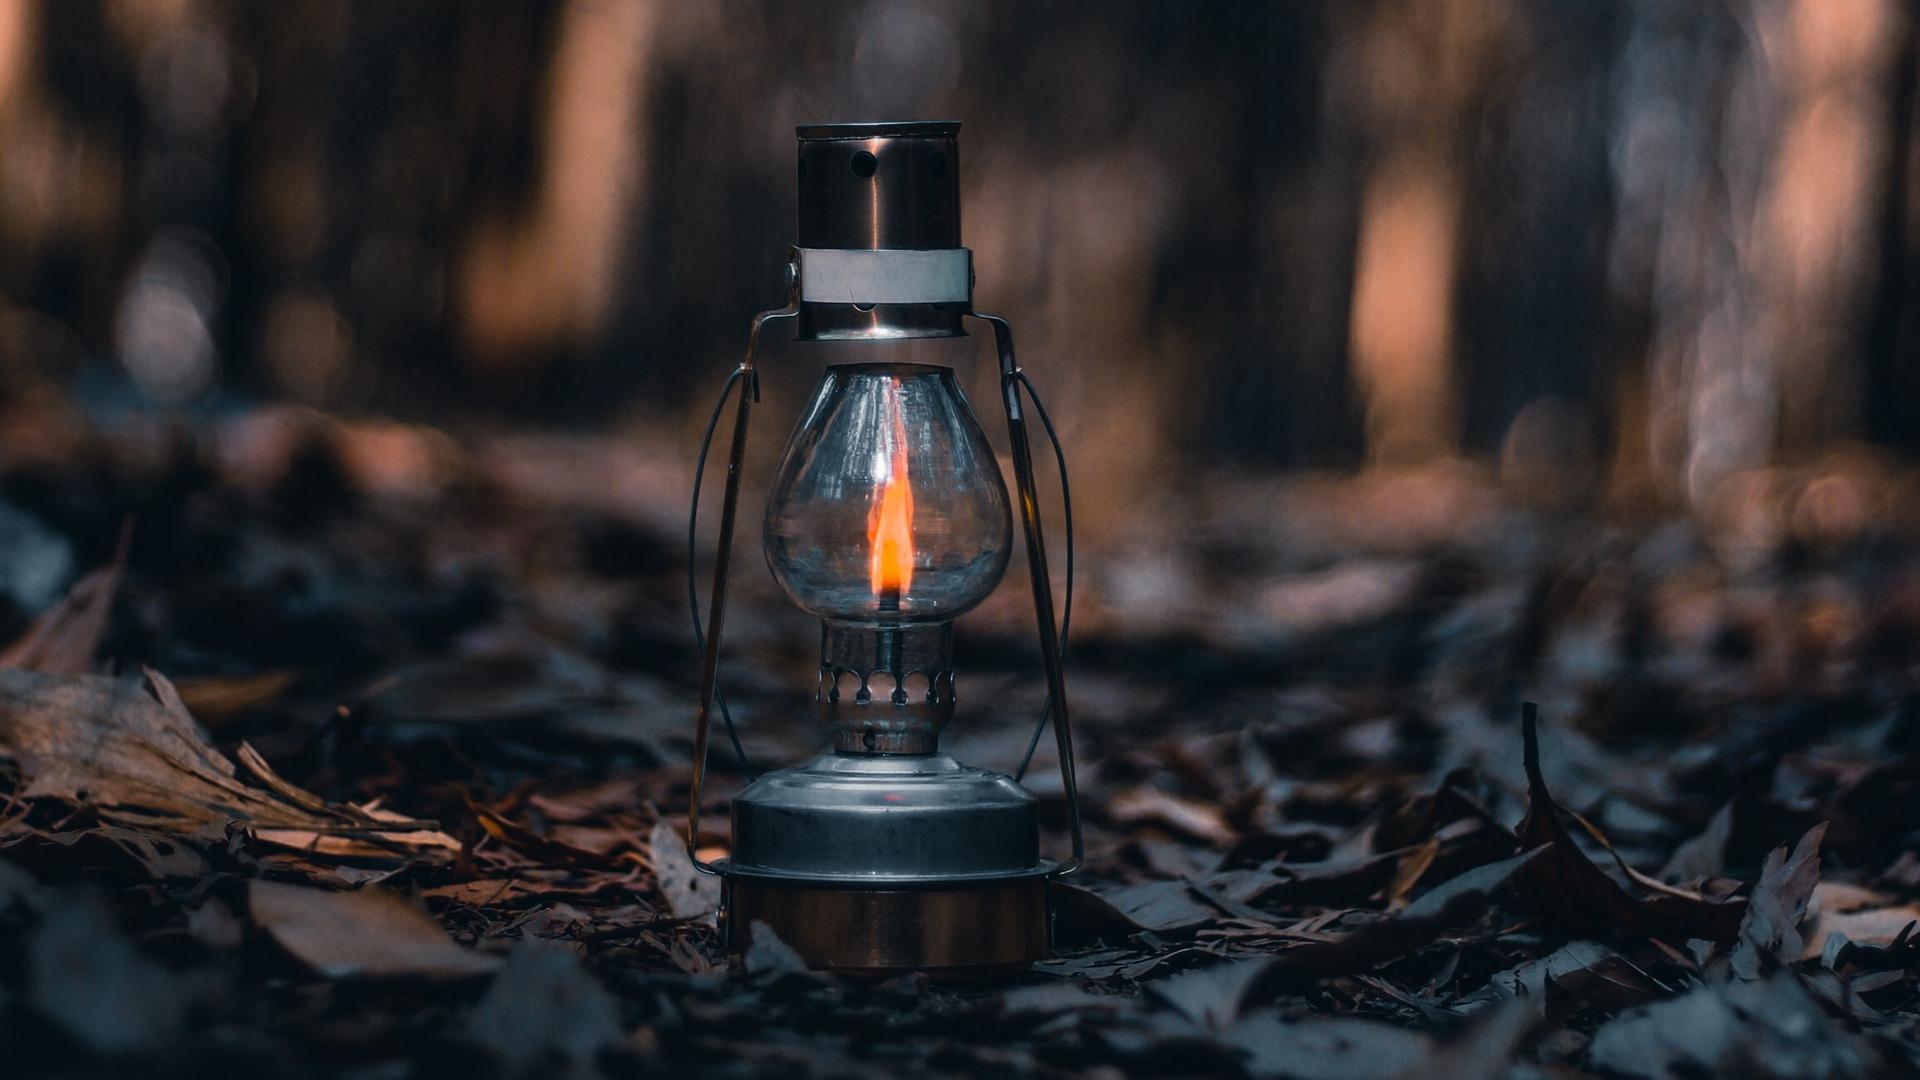 Download wallpaper 1920x1080 lamp, lantern, fire, leaves, dry, autumn full hd, hdtv, fhd, 1080p HD background